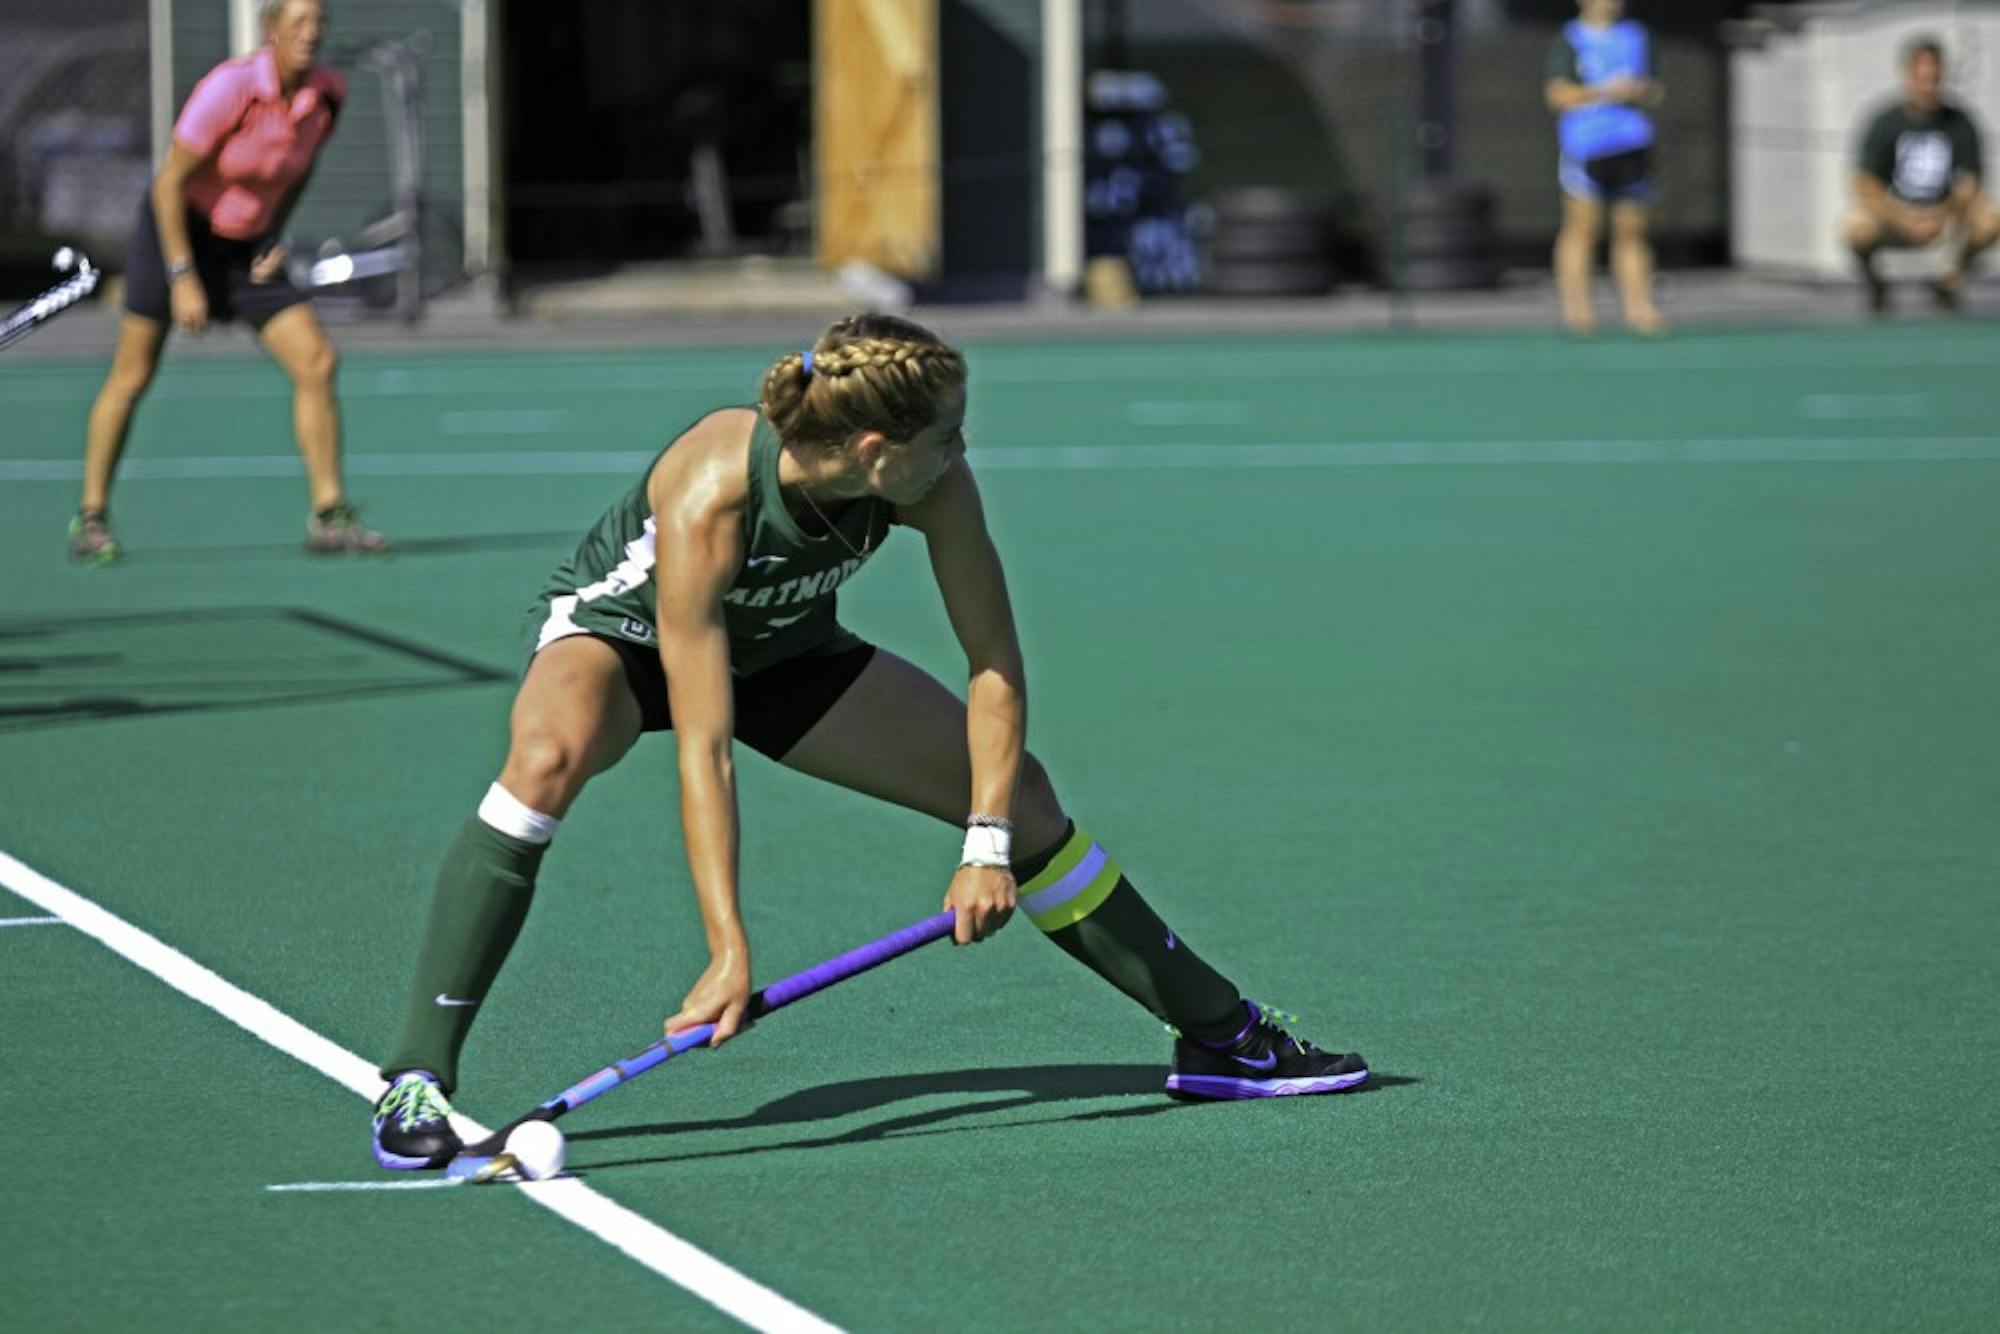 The field hockey team, which plays the University of Maine today, won its third consecutive game on Saturday 5-3 over Penn.